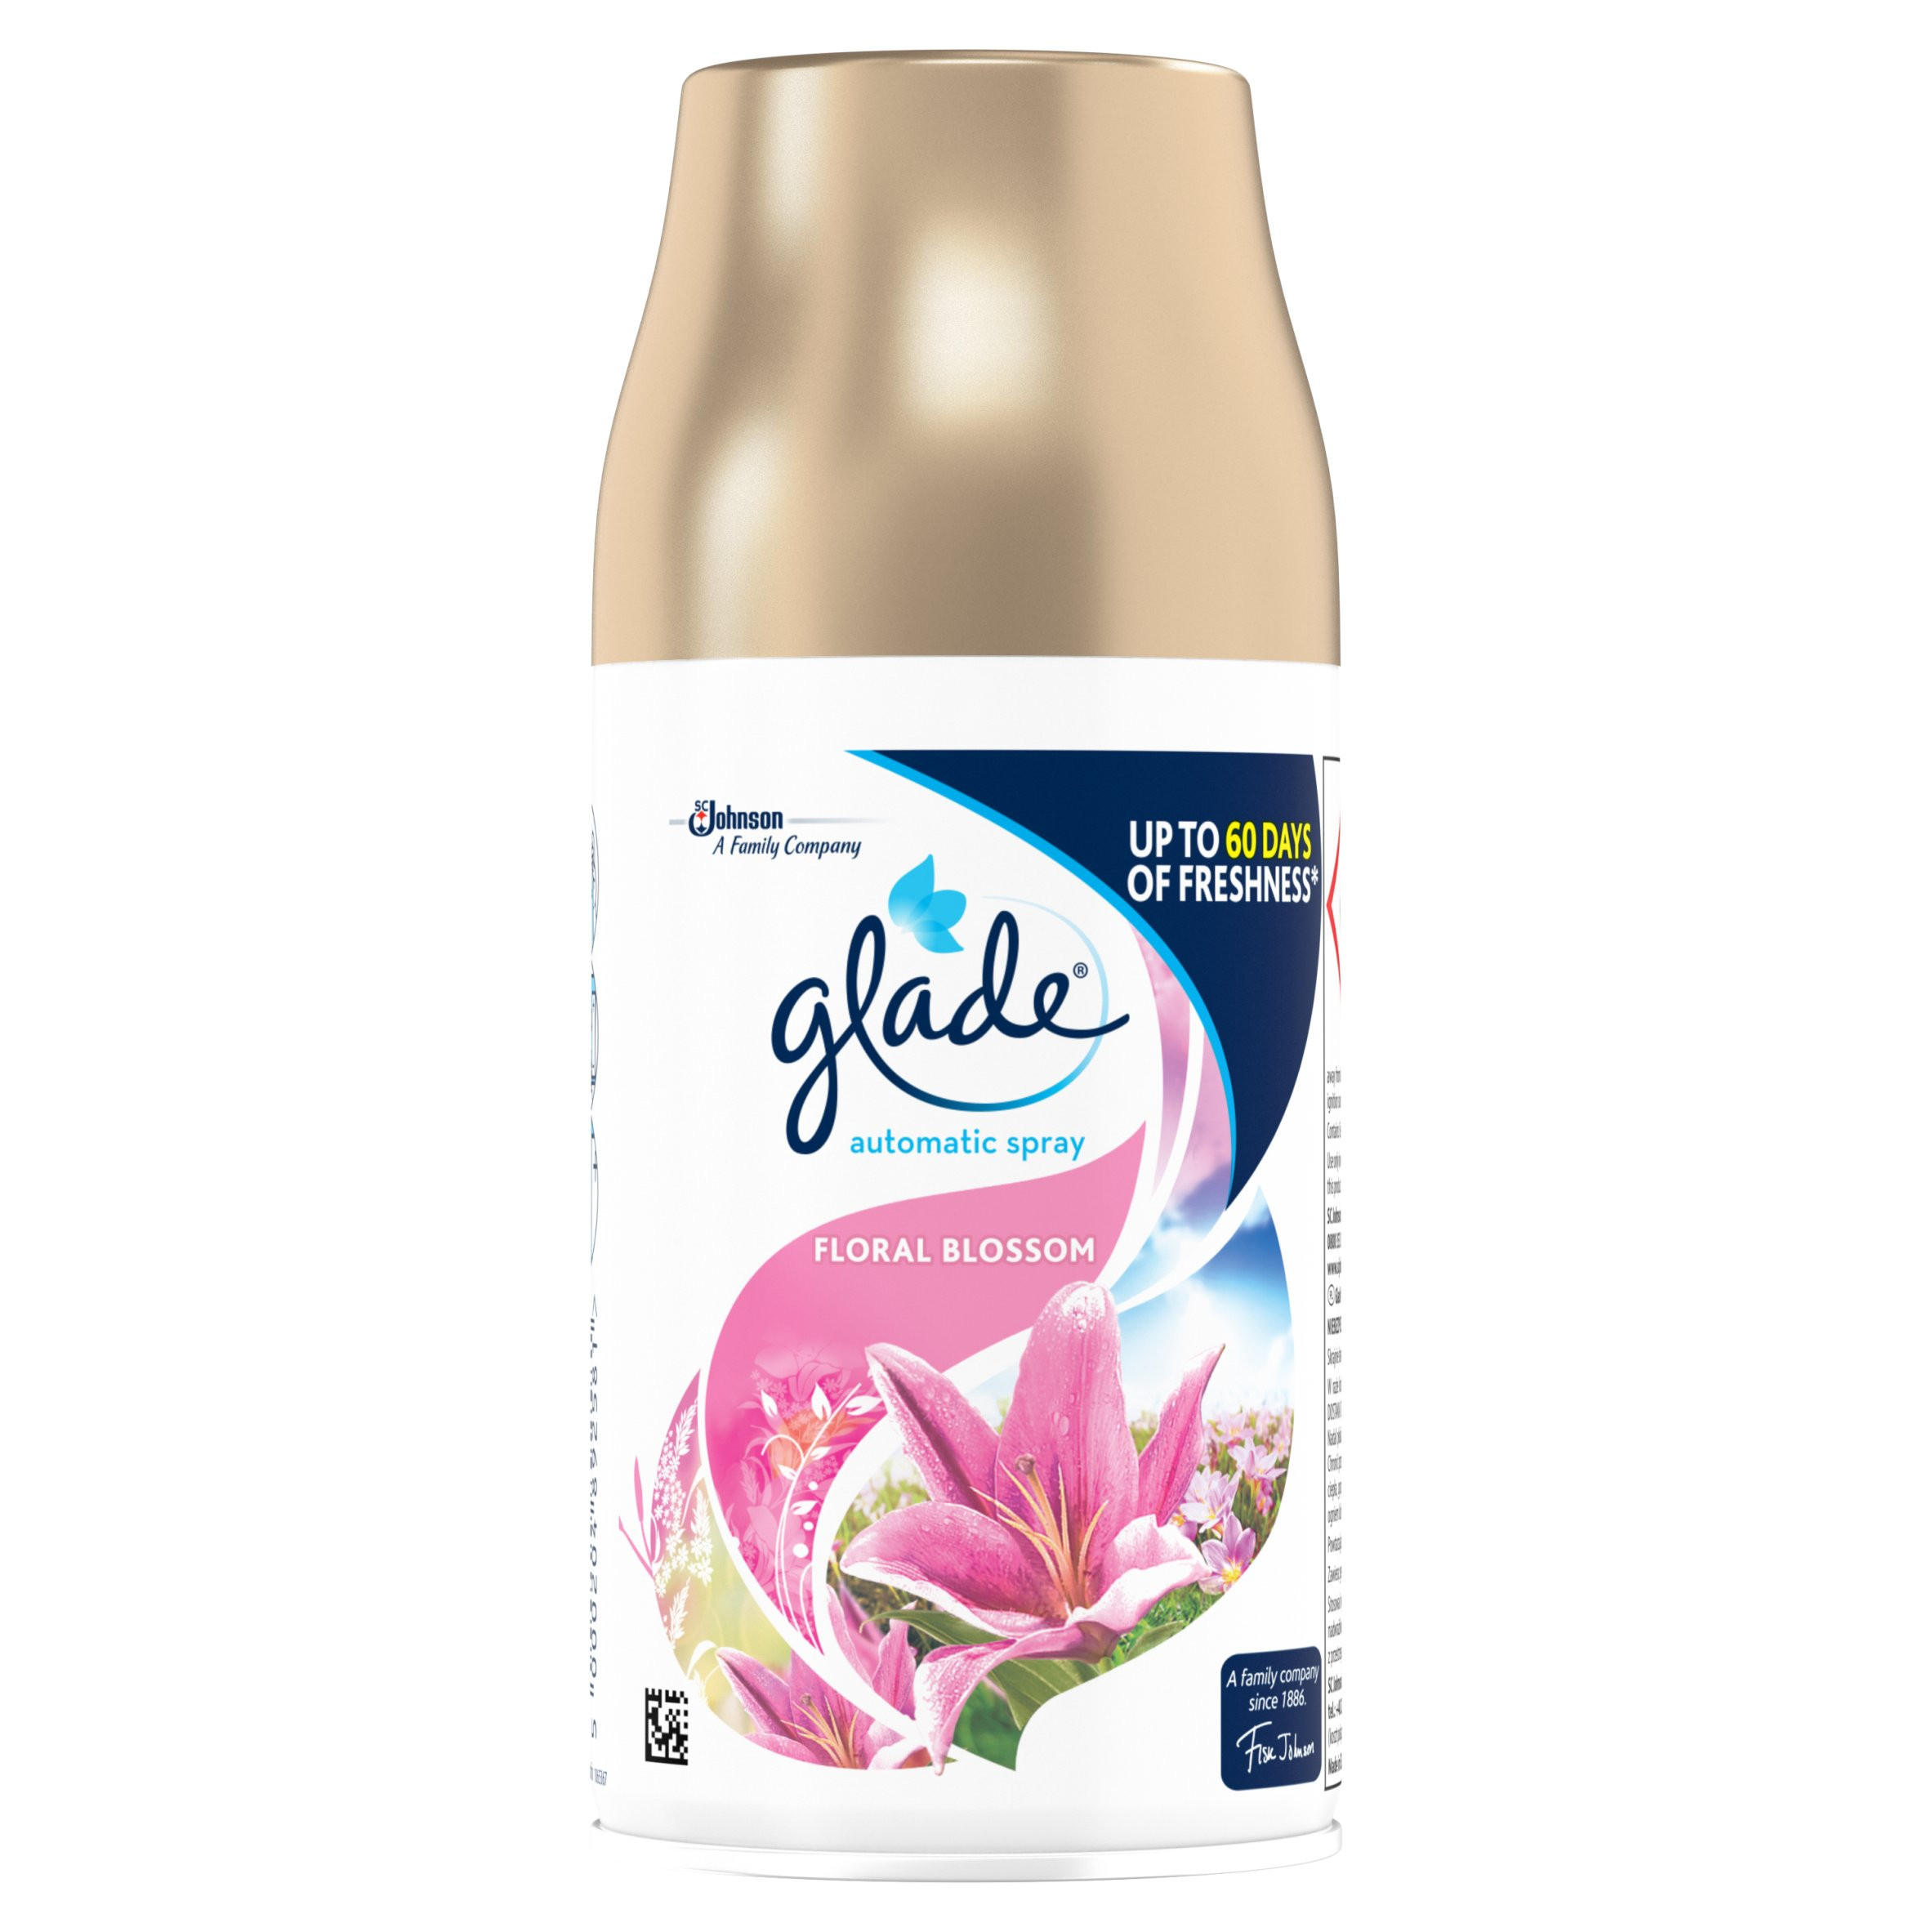 GLADE - Recharge For Deodorant Fragrances Microsprays Assorted 1 Refill